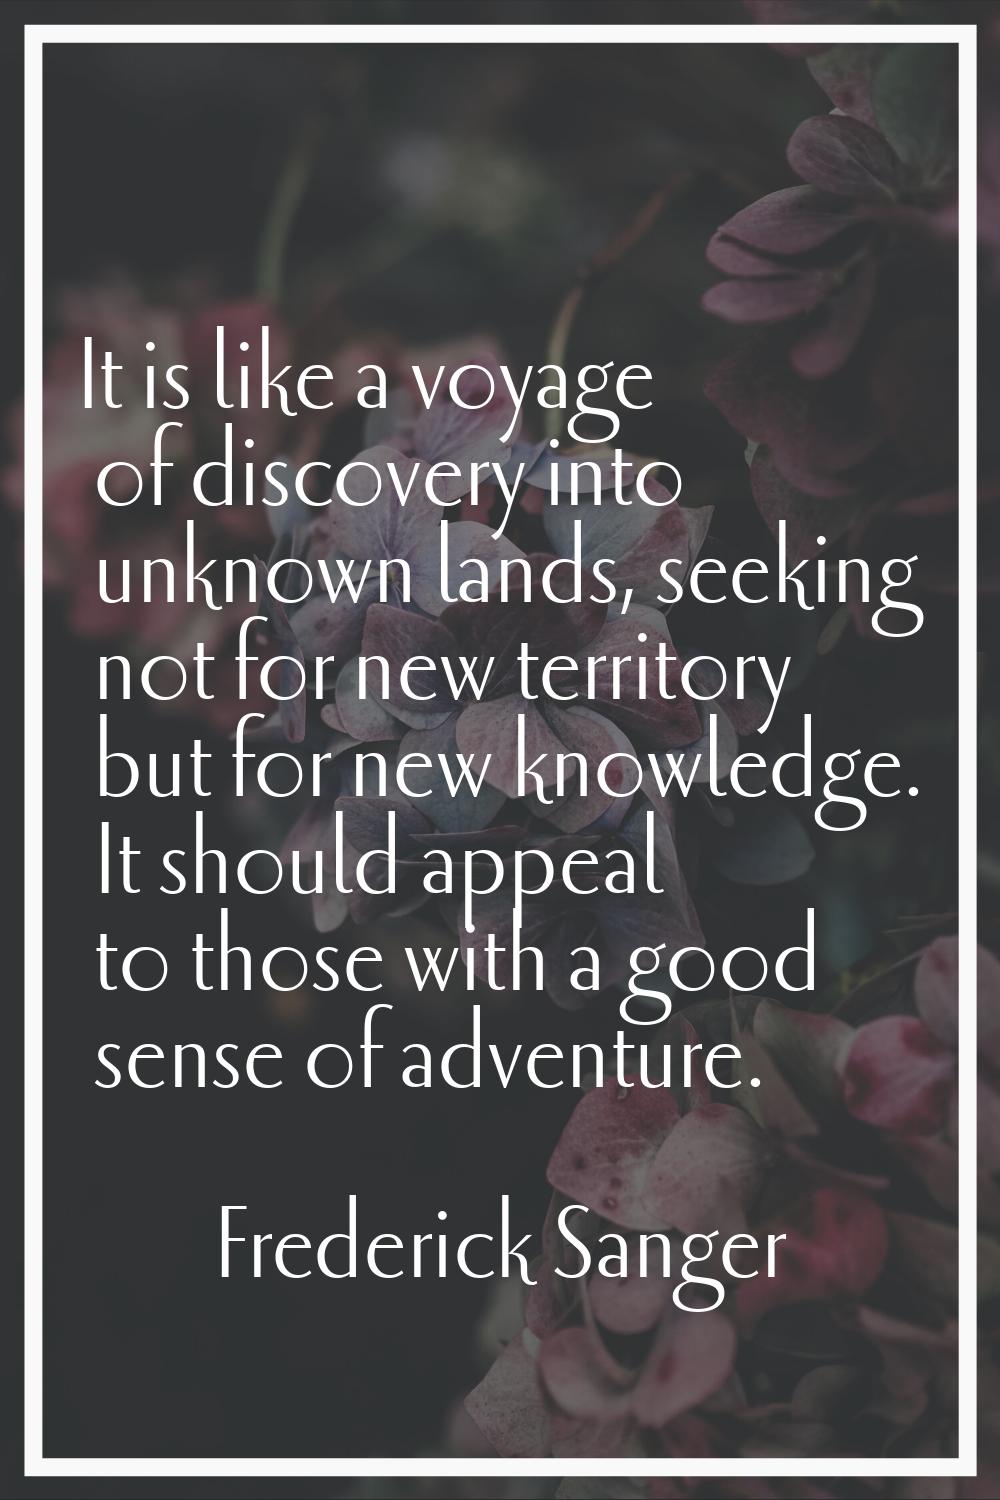 It is like a voyage of discovery into unknown lands, seeking not for new territory but for new know